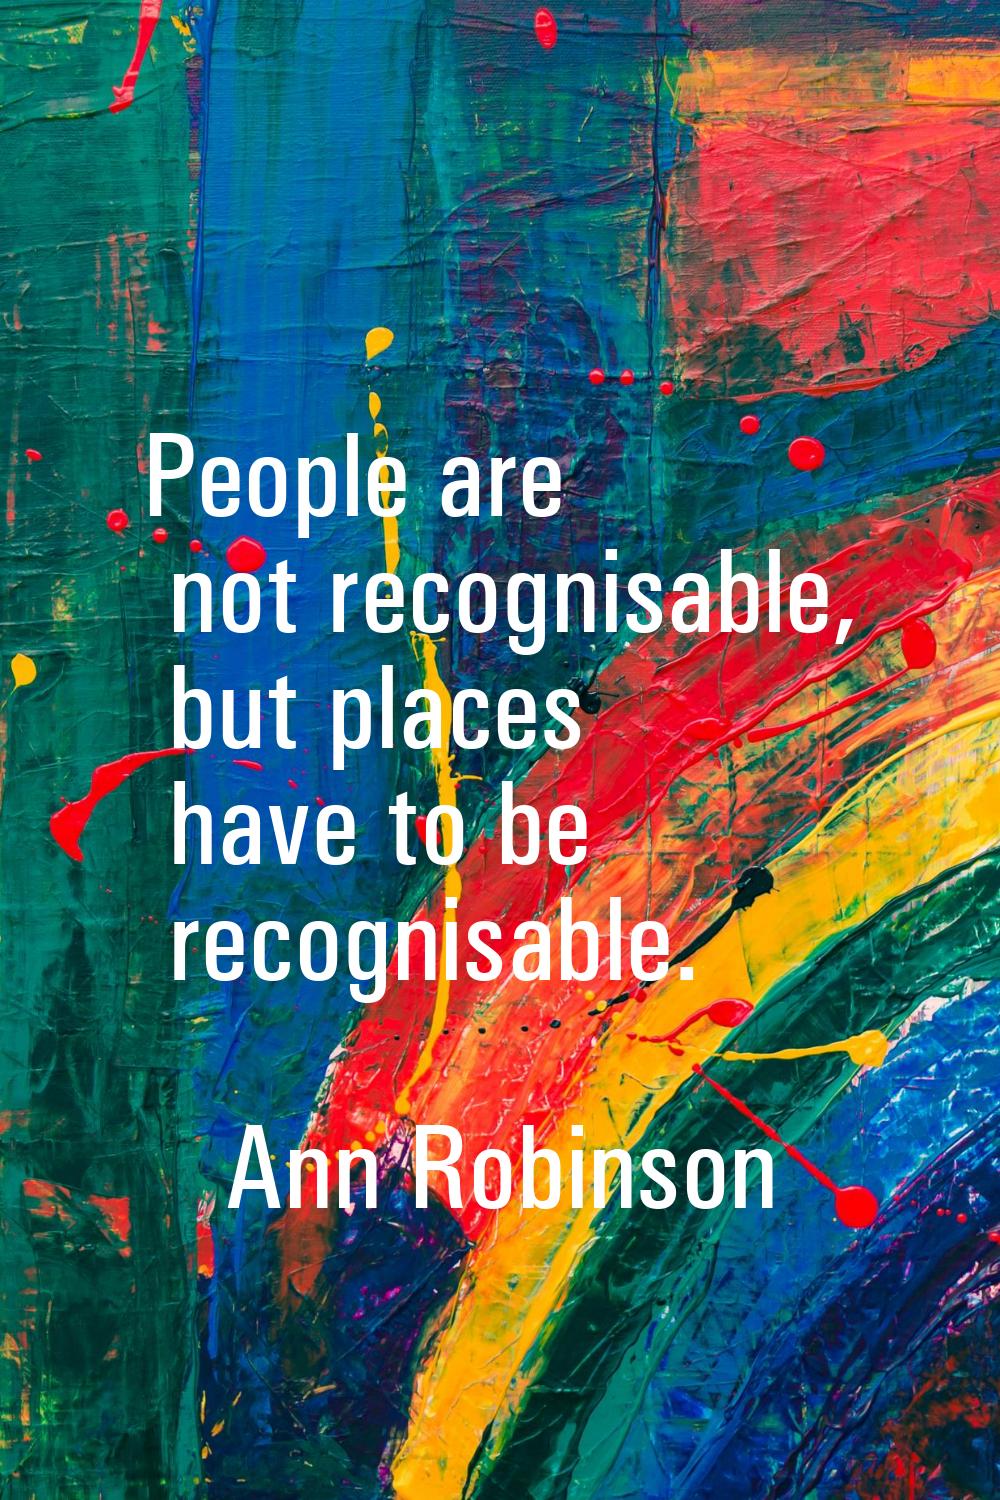 People are not recognisable, but places have to be recognisable.